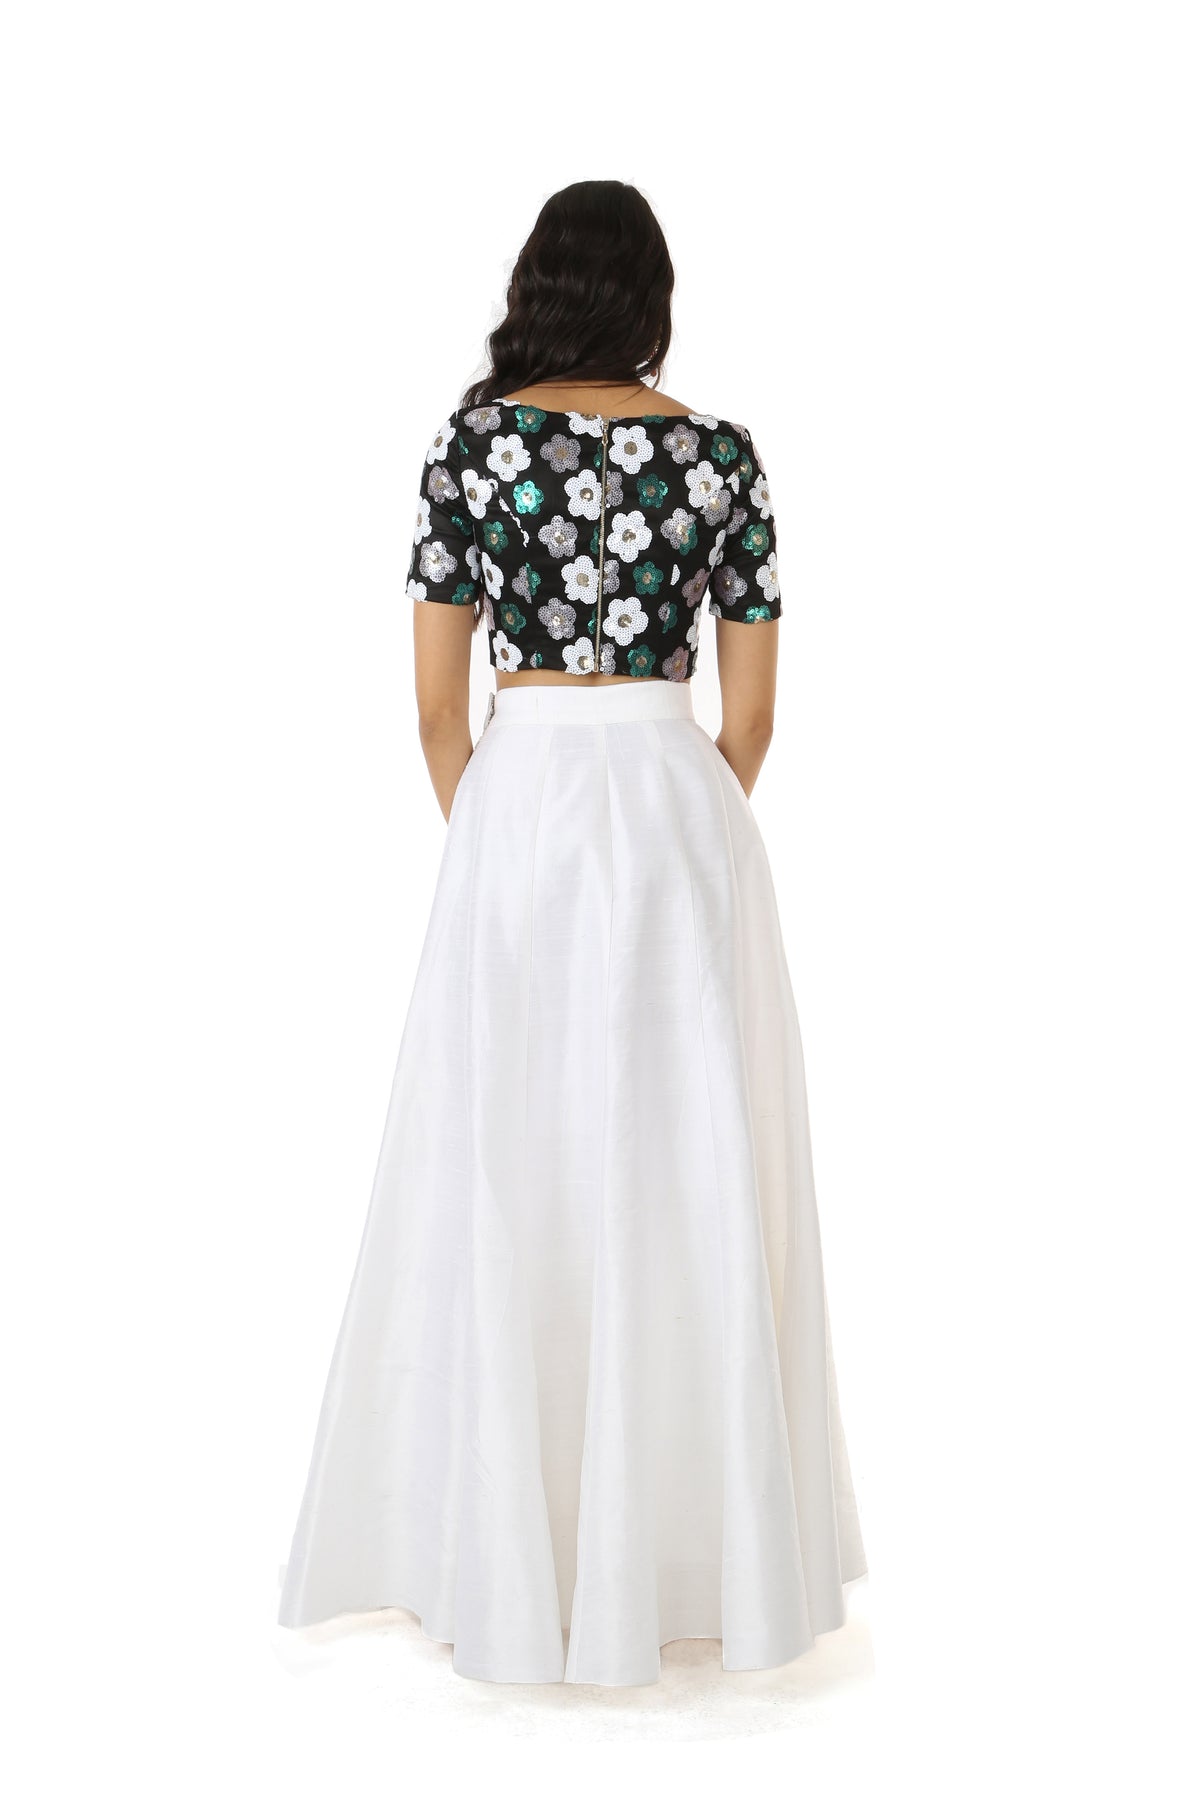 Harleen Kaur SANYA Black Sequin Crop Top with White, Green, and Silver Flowers - Back View